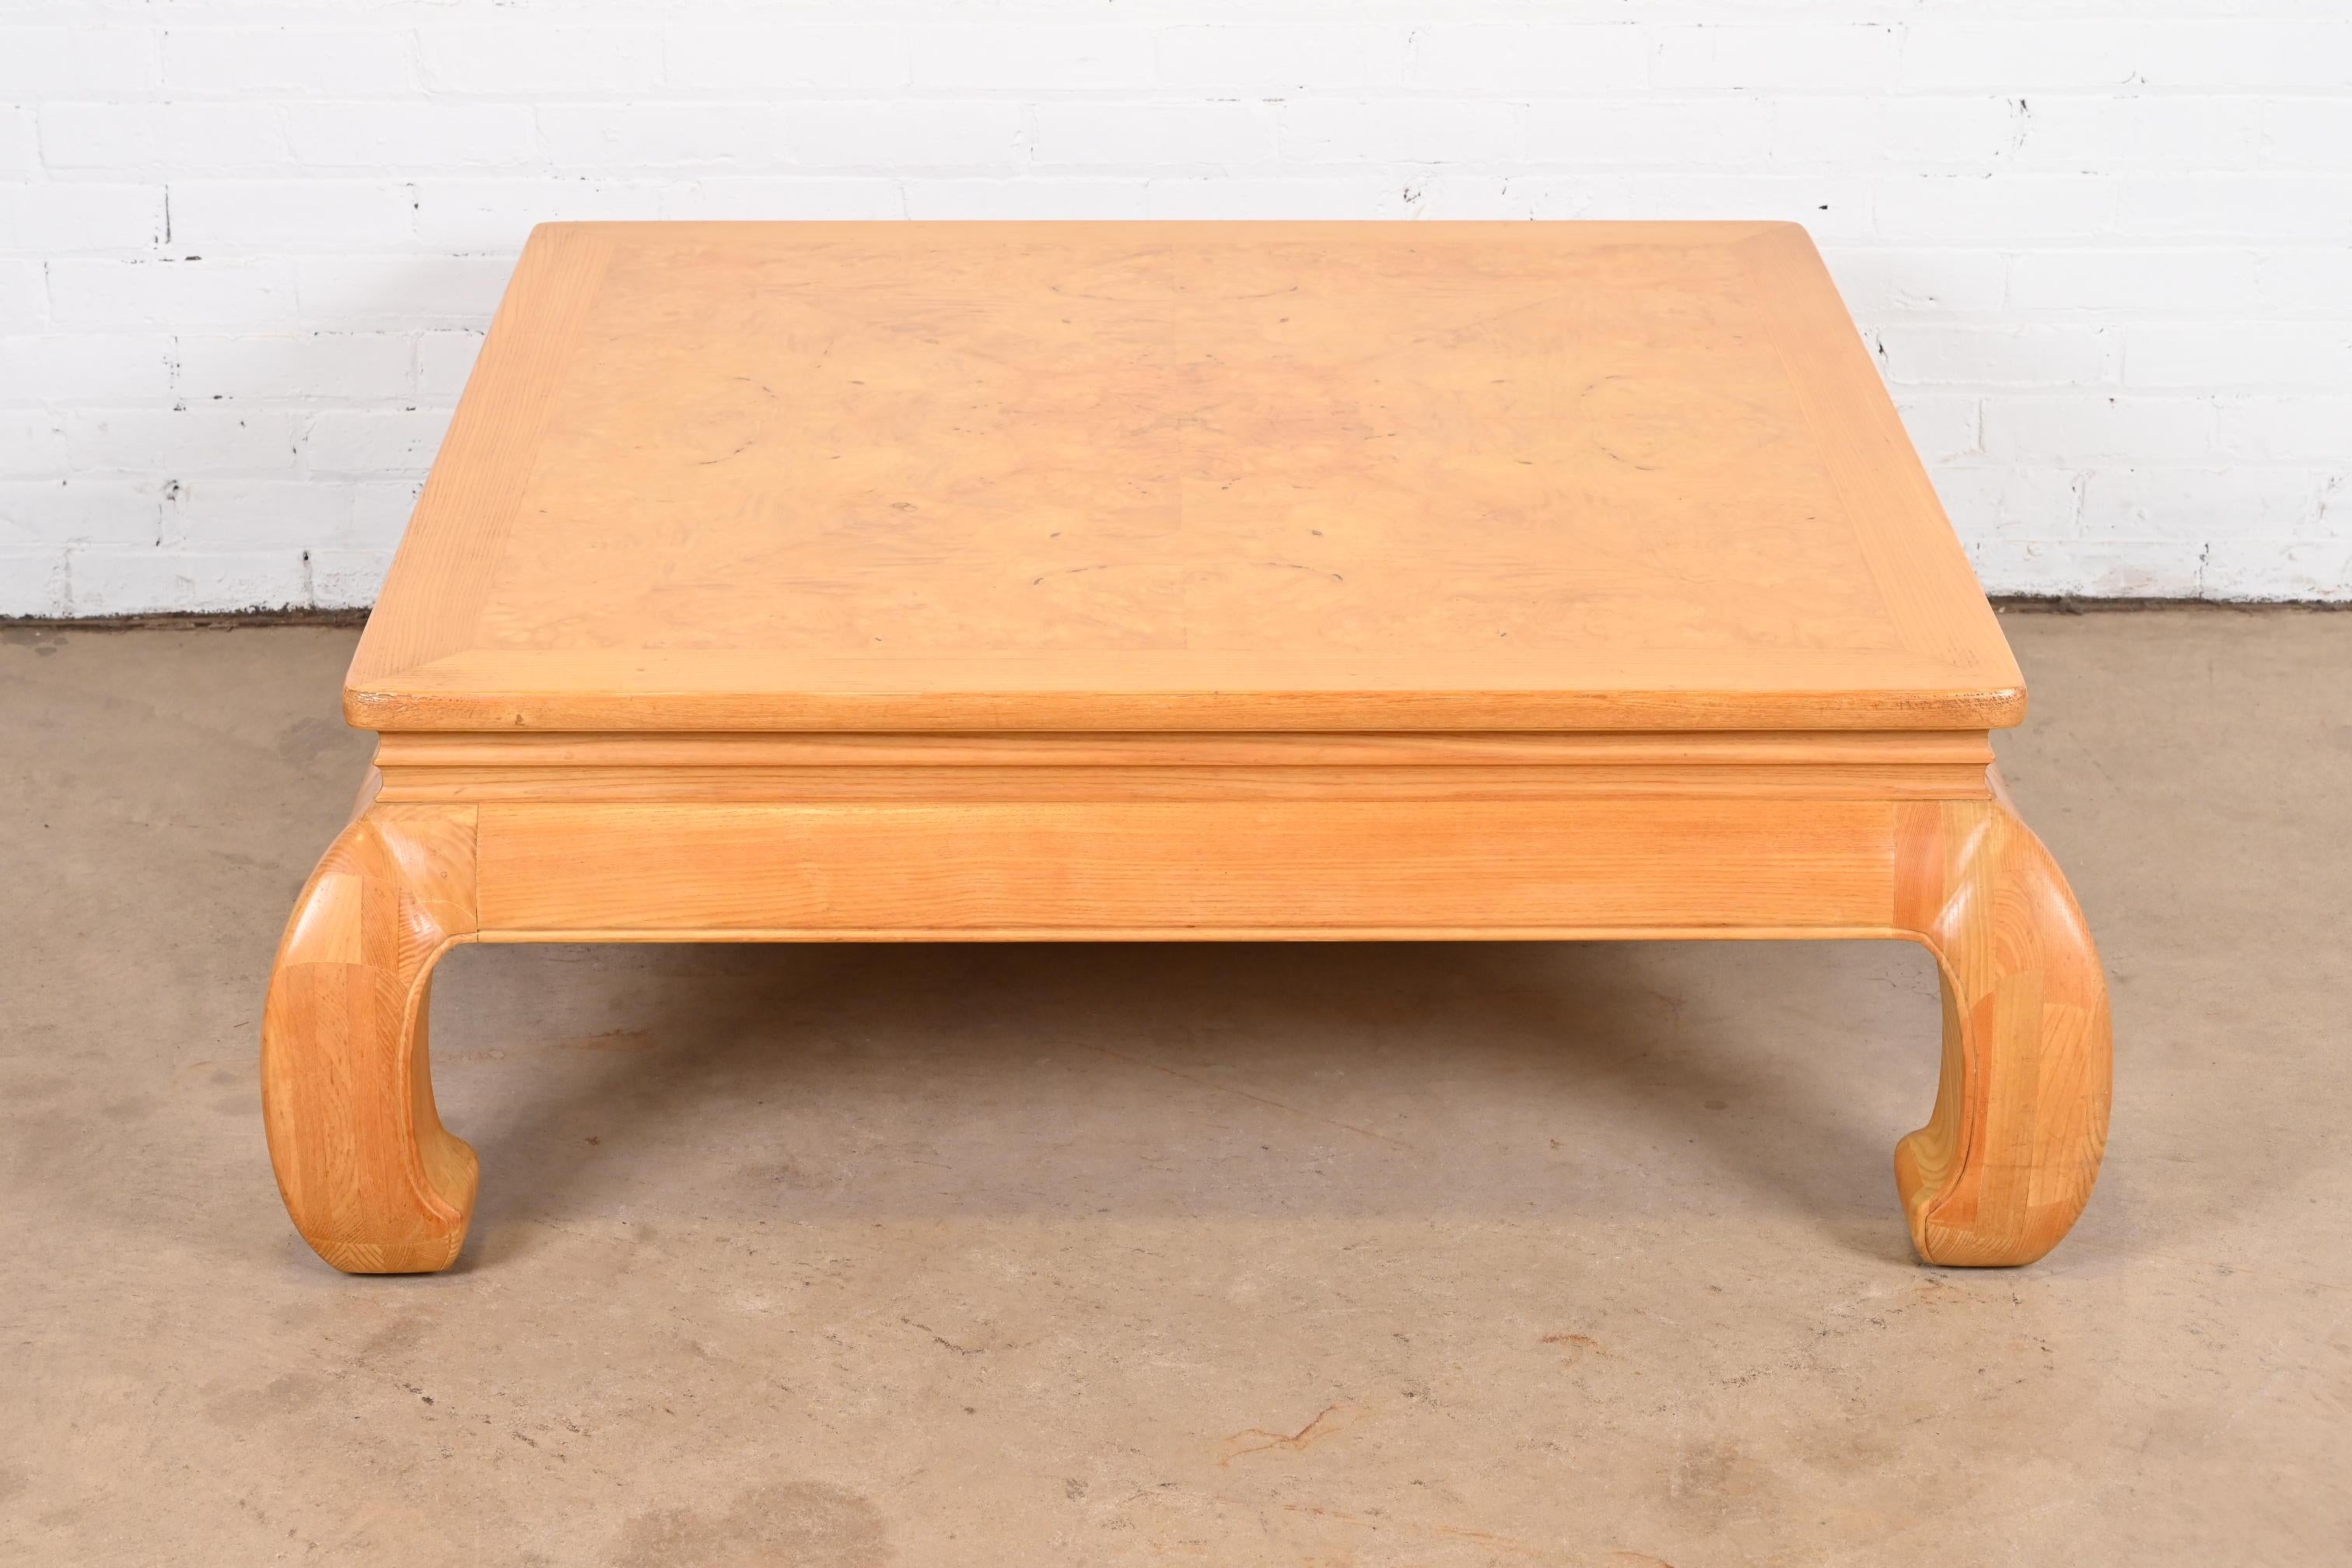 Milo Baughman Style Mid-Century Modern Burl Wood Coffee Table by Henredon In Good Condition For Sale In South Bend, IN